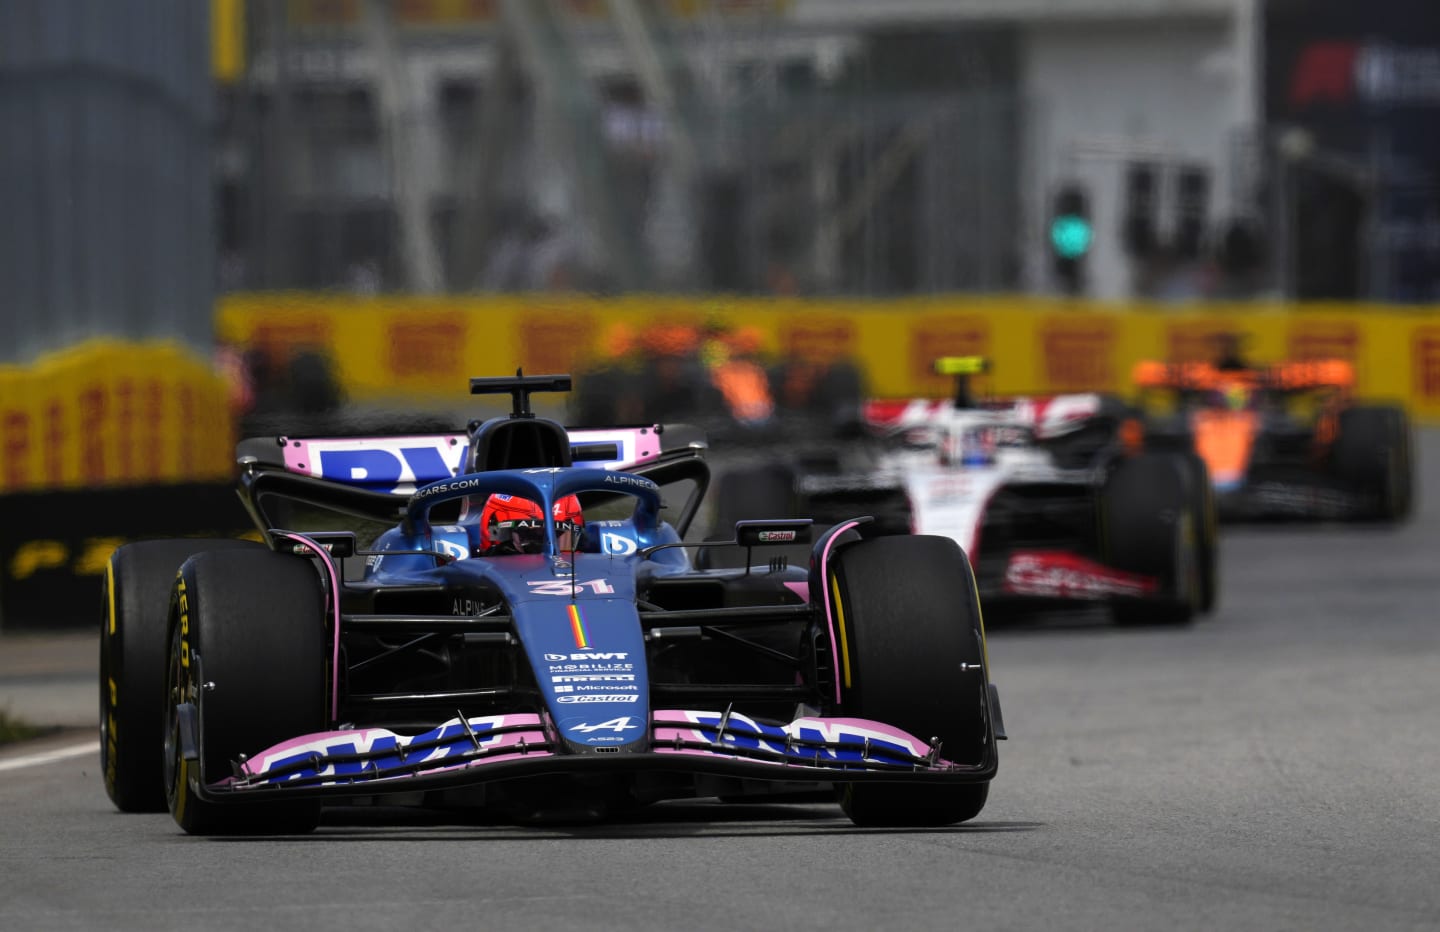 MONTREAL, QUEBEC - JUNE 18: Esteban Ocon of France driving the (31) Alpine F1 A523 Renault on track during the F1 Grand Prix of Canada at Circuit Gilles Villeneuve on June 18, 2023 in Montreal, Quebec. (Photo by Rudy Carezzevoli/Getty Images)